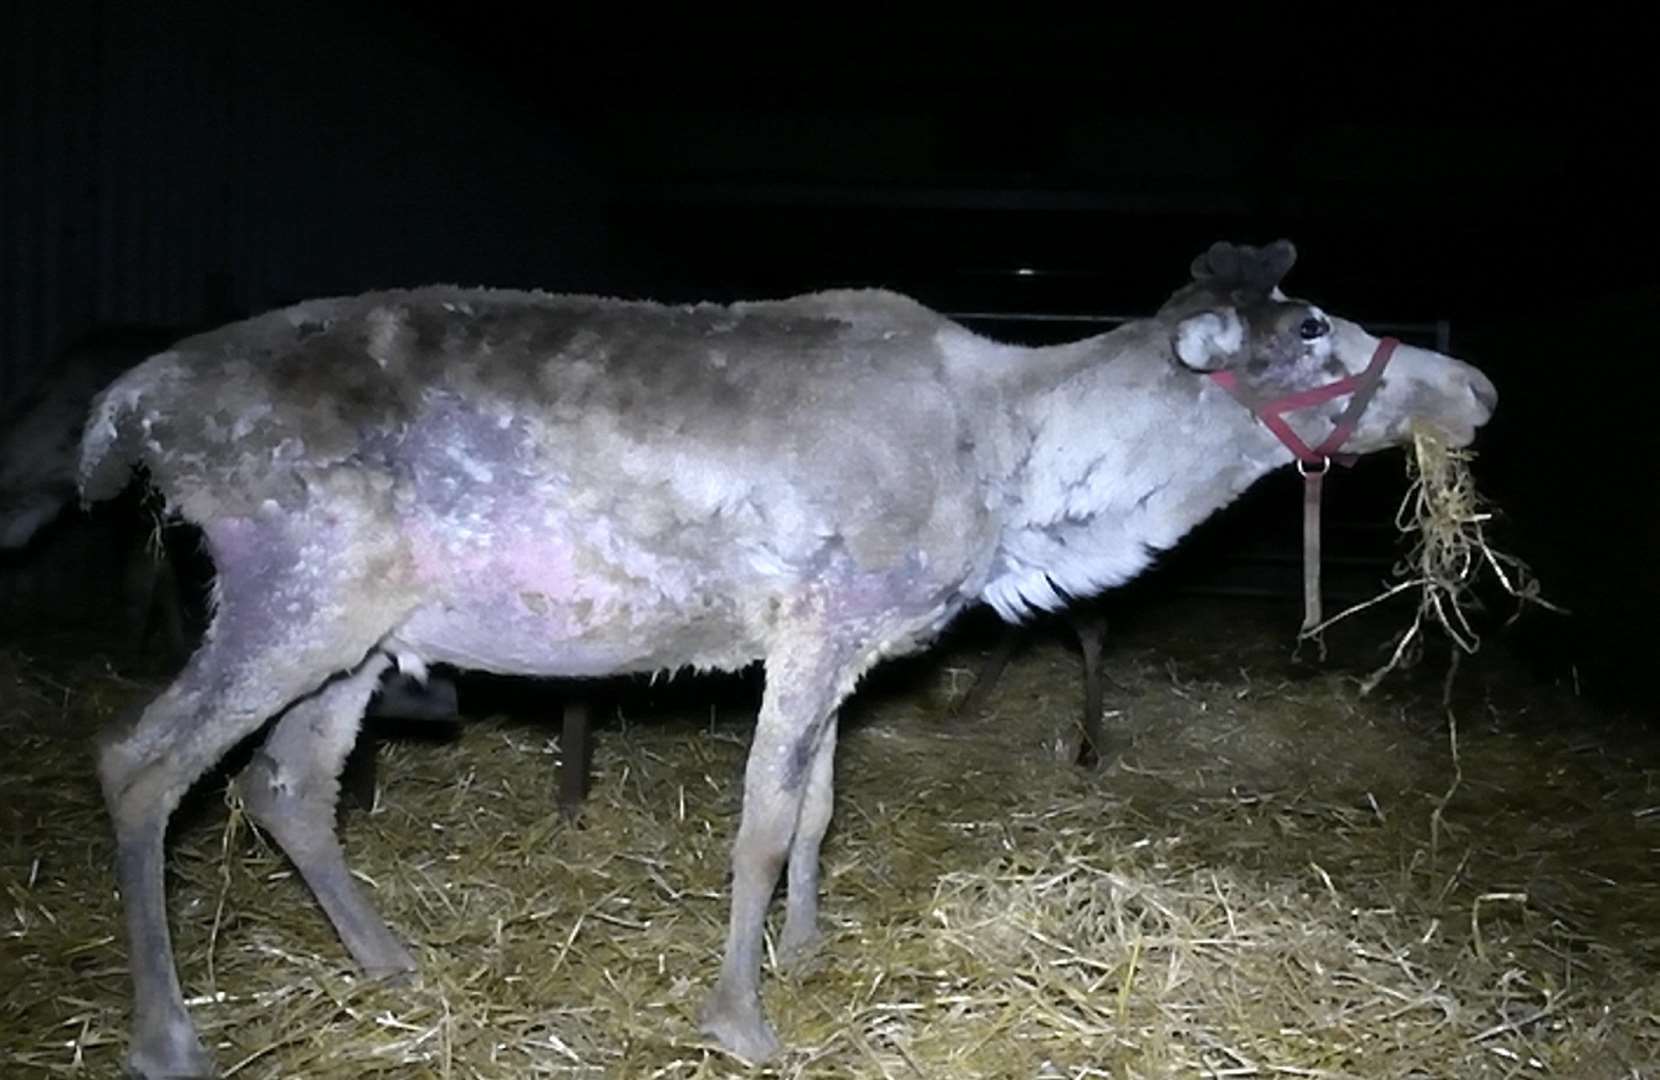 Reindeers' raw, exposed skin was among the issues highlighted by the footage. Picture: SWNS (5221194)